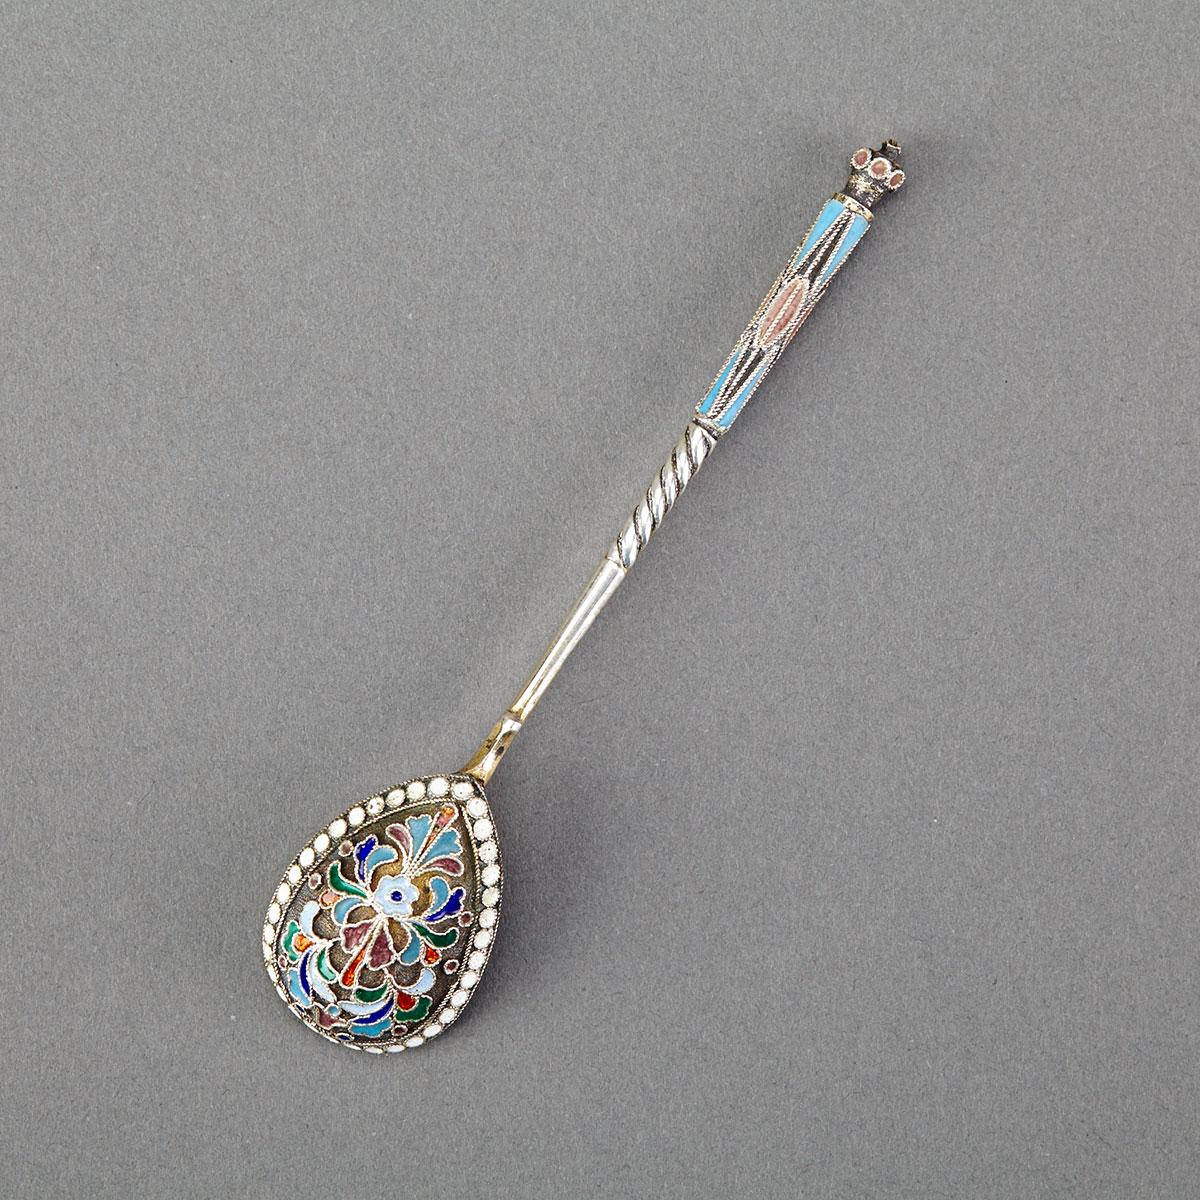 Russian Silver and Cloisonné Enamel Spoon, Moscow, c.1908-17